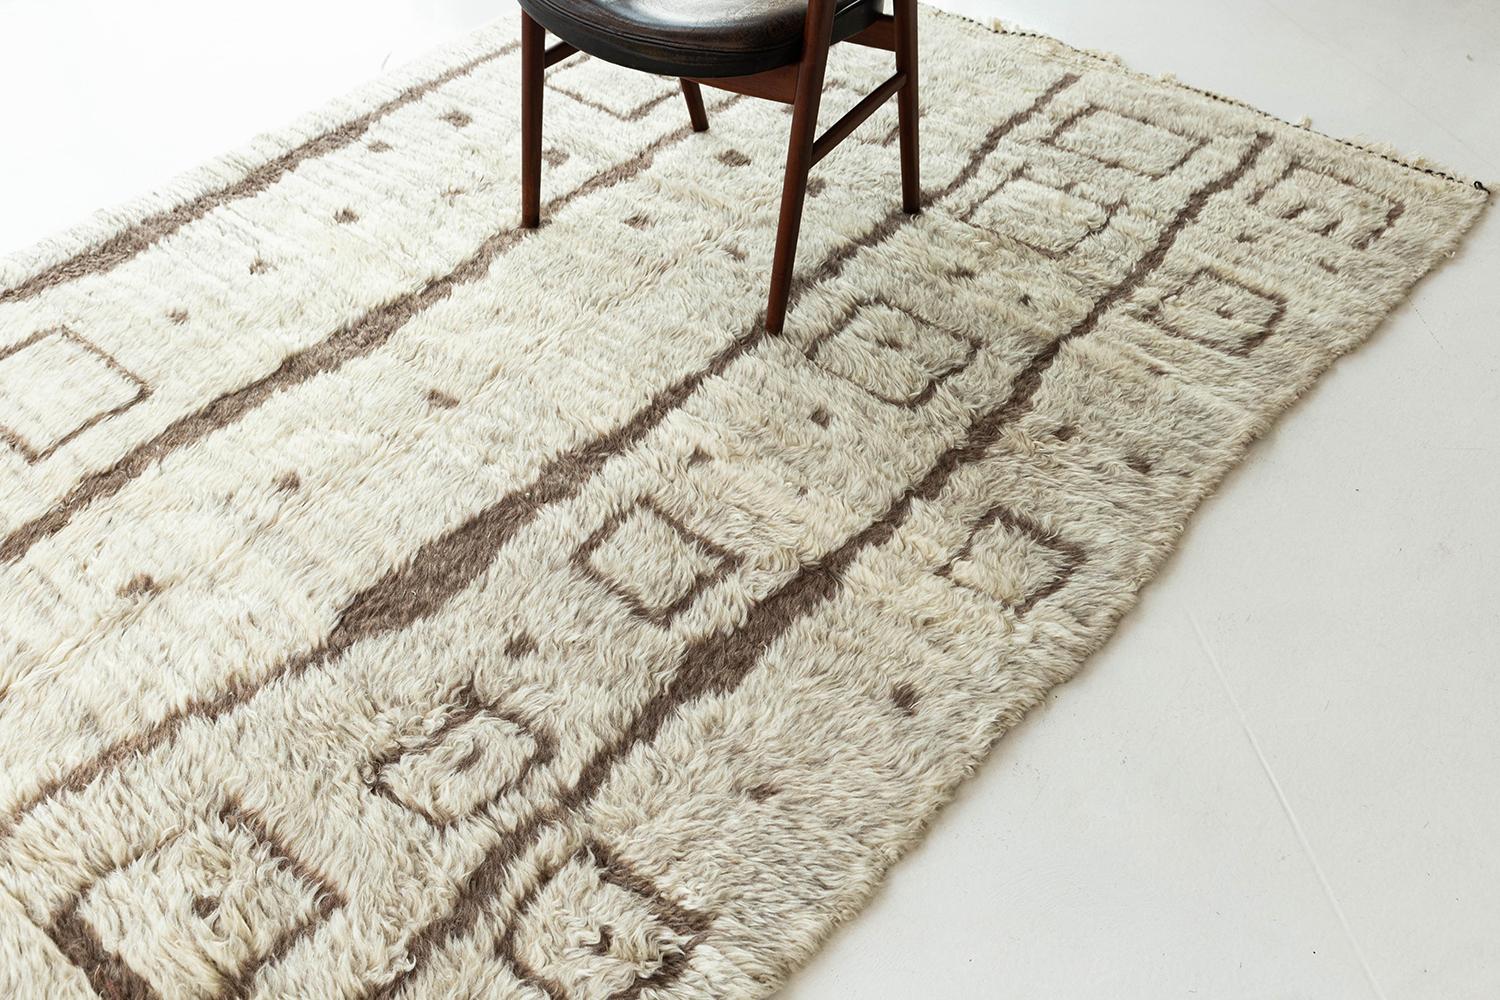 A beautiful Beni Ourain tribal Moroccan rug that exudes sophistication and charm. A ivory pile weave adorned with taupe tribal elements makes for the perfect contemporary. This handwoven wool piece brings an exciting essence to any design space.